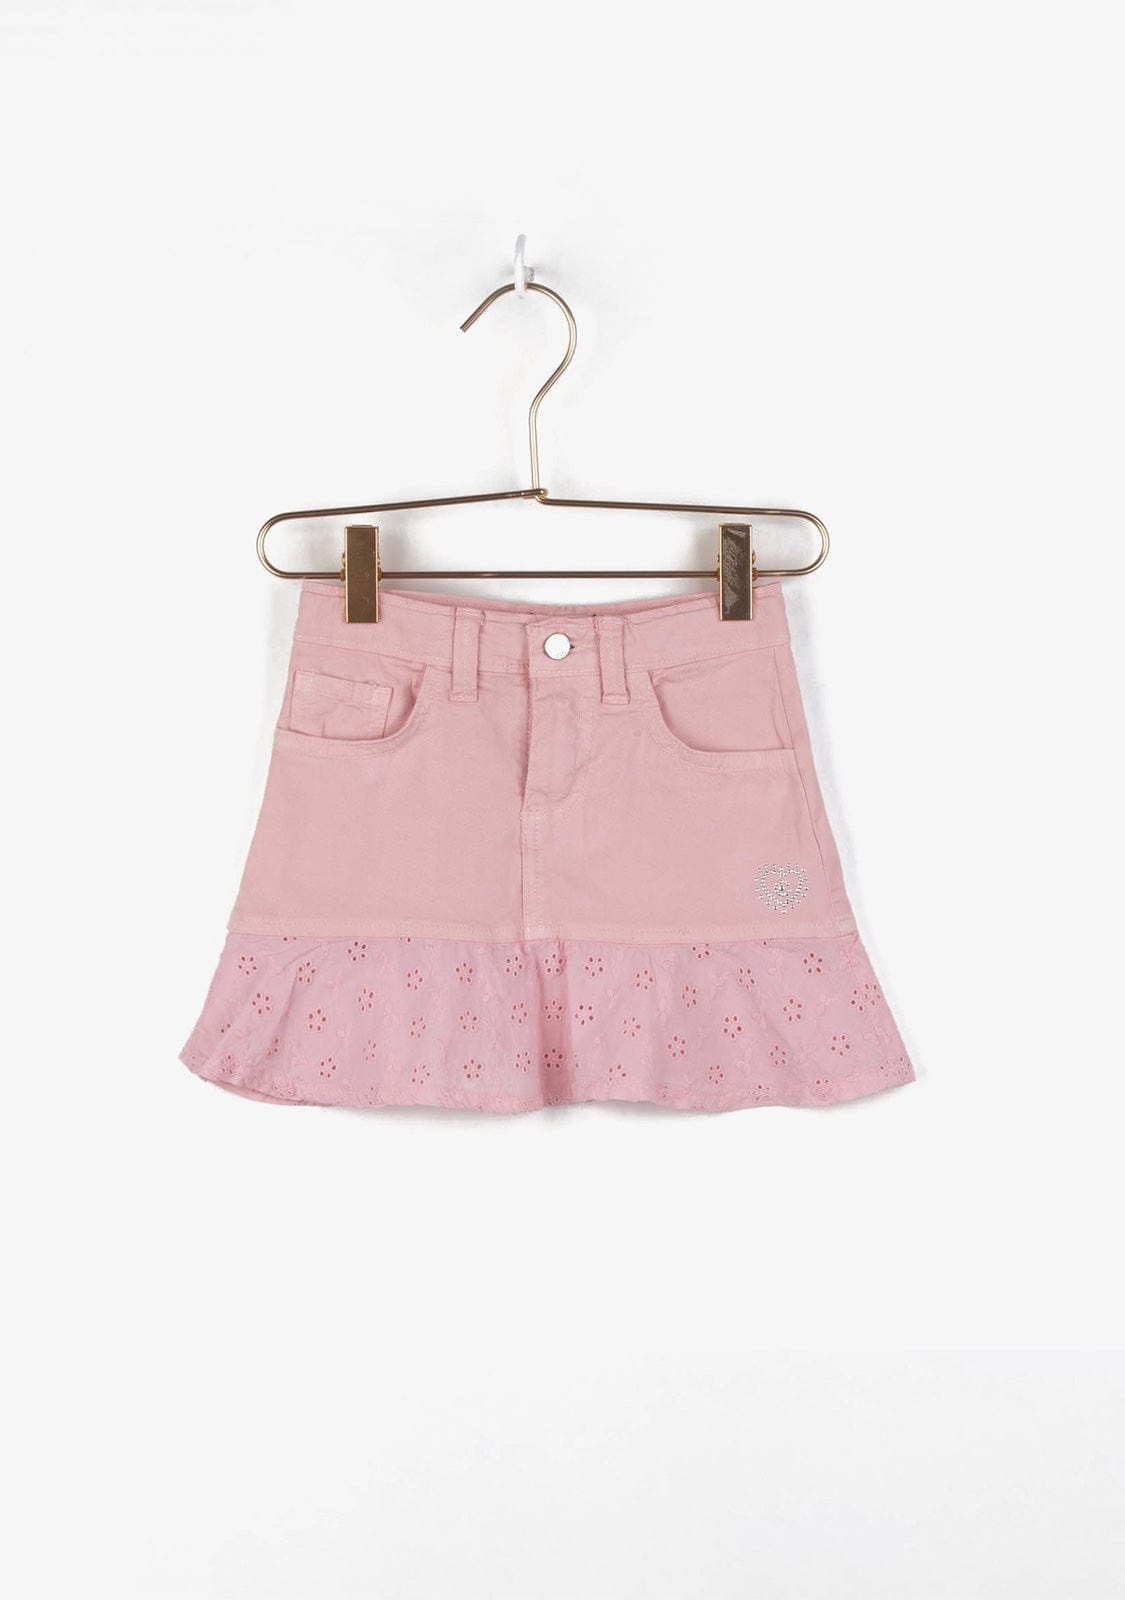 CONGUITOS TEXTIL Clothing Girl's Pink Ruffled Flared Skirt